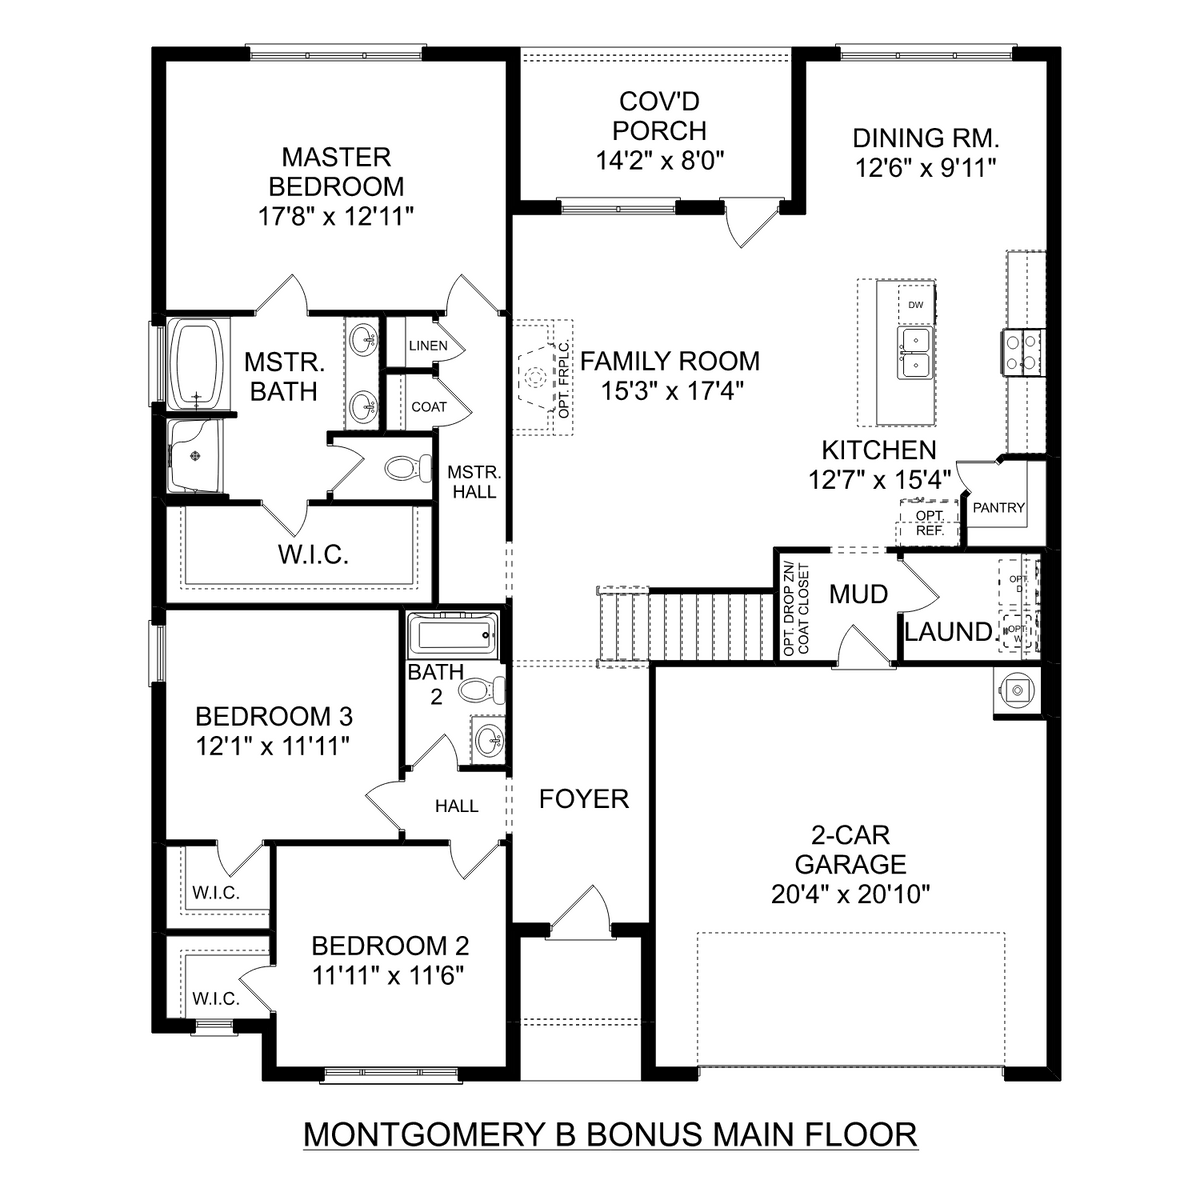 1 - The Montgomery B With Bonus buildable floor plan layout in Davidson Homes' Cain Park community.